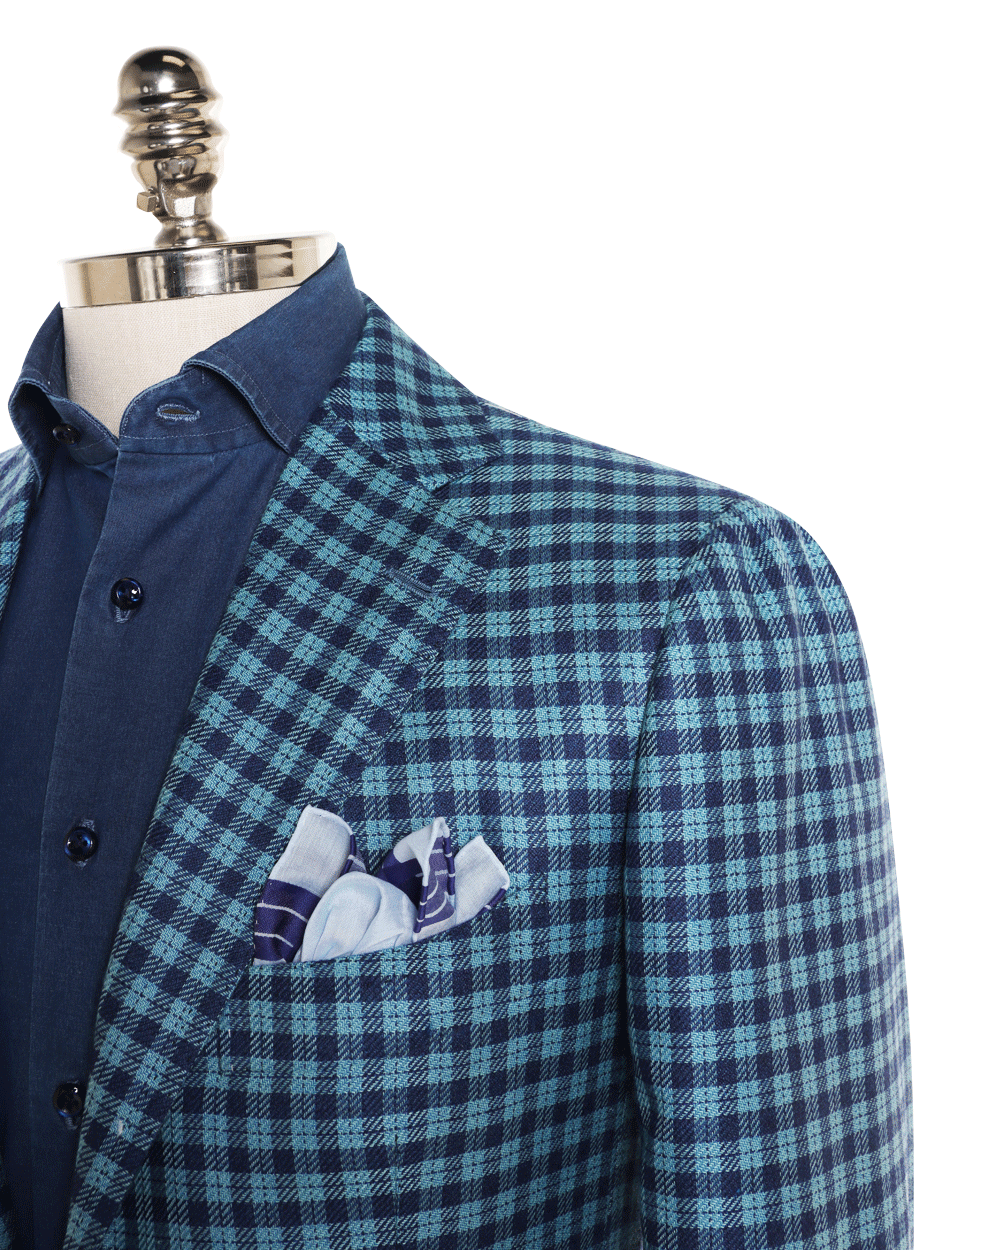 Teal and Navy Cashmere Blend Plaid Sportcoat